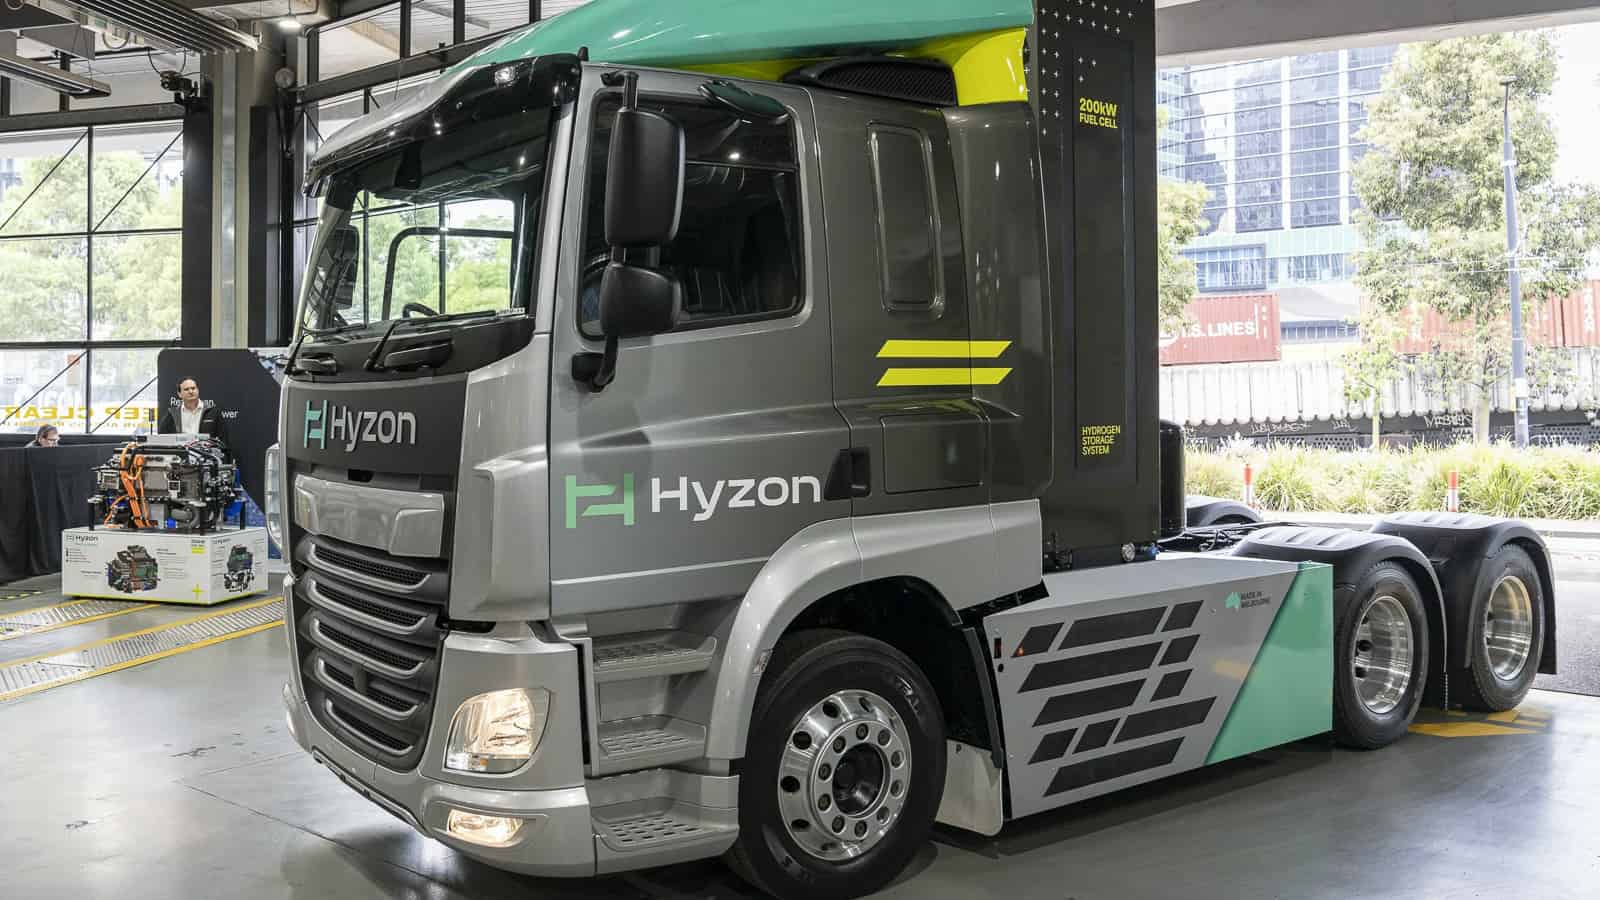 Hyzon’s Prime Mover in the foreground with John Edgley, Managing Director, Hyzon Australia standing by the newly introduced single stack 200kW fuel cell system, which powers the vehicle.